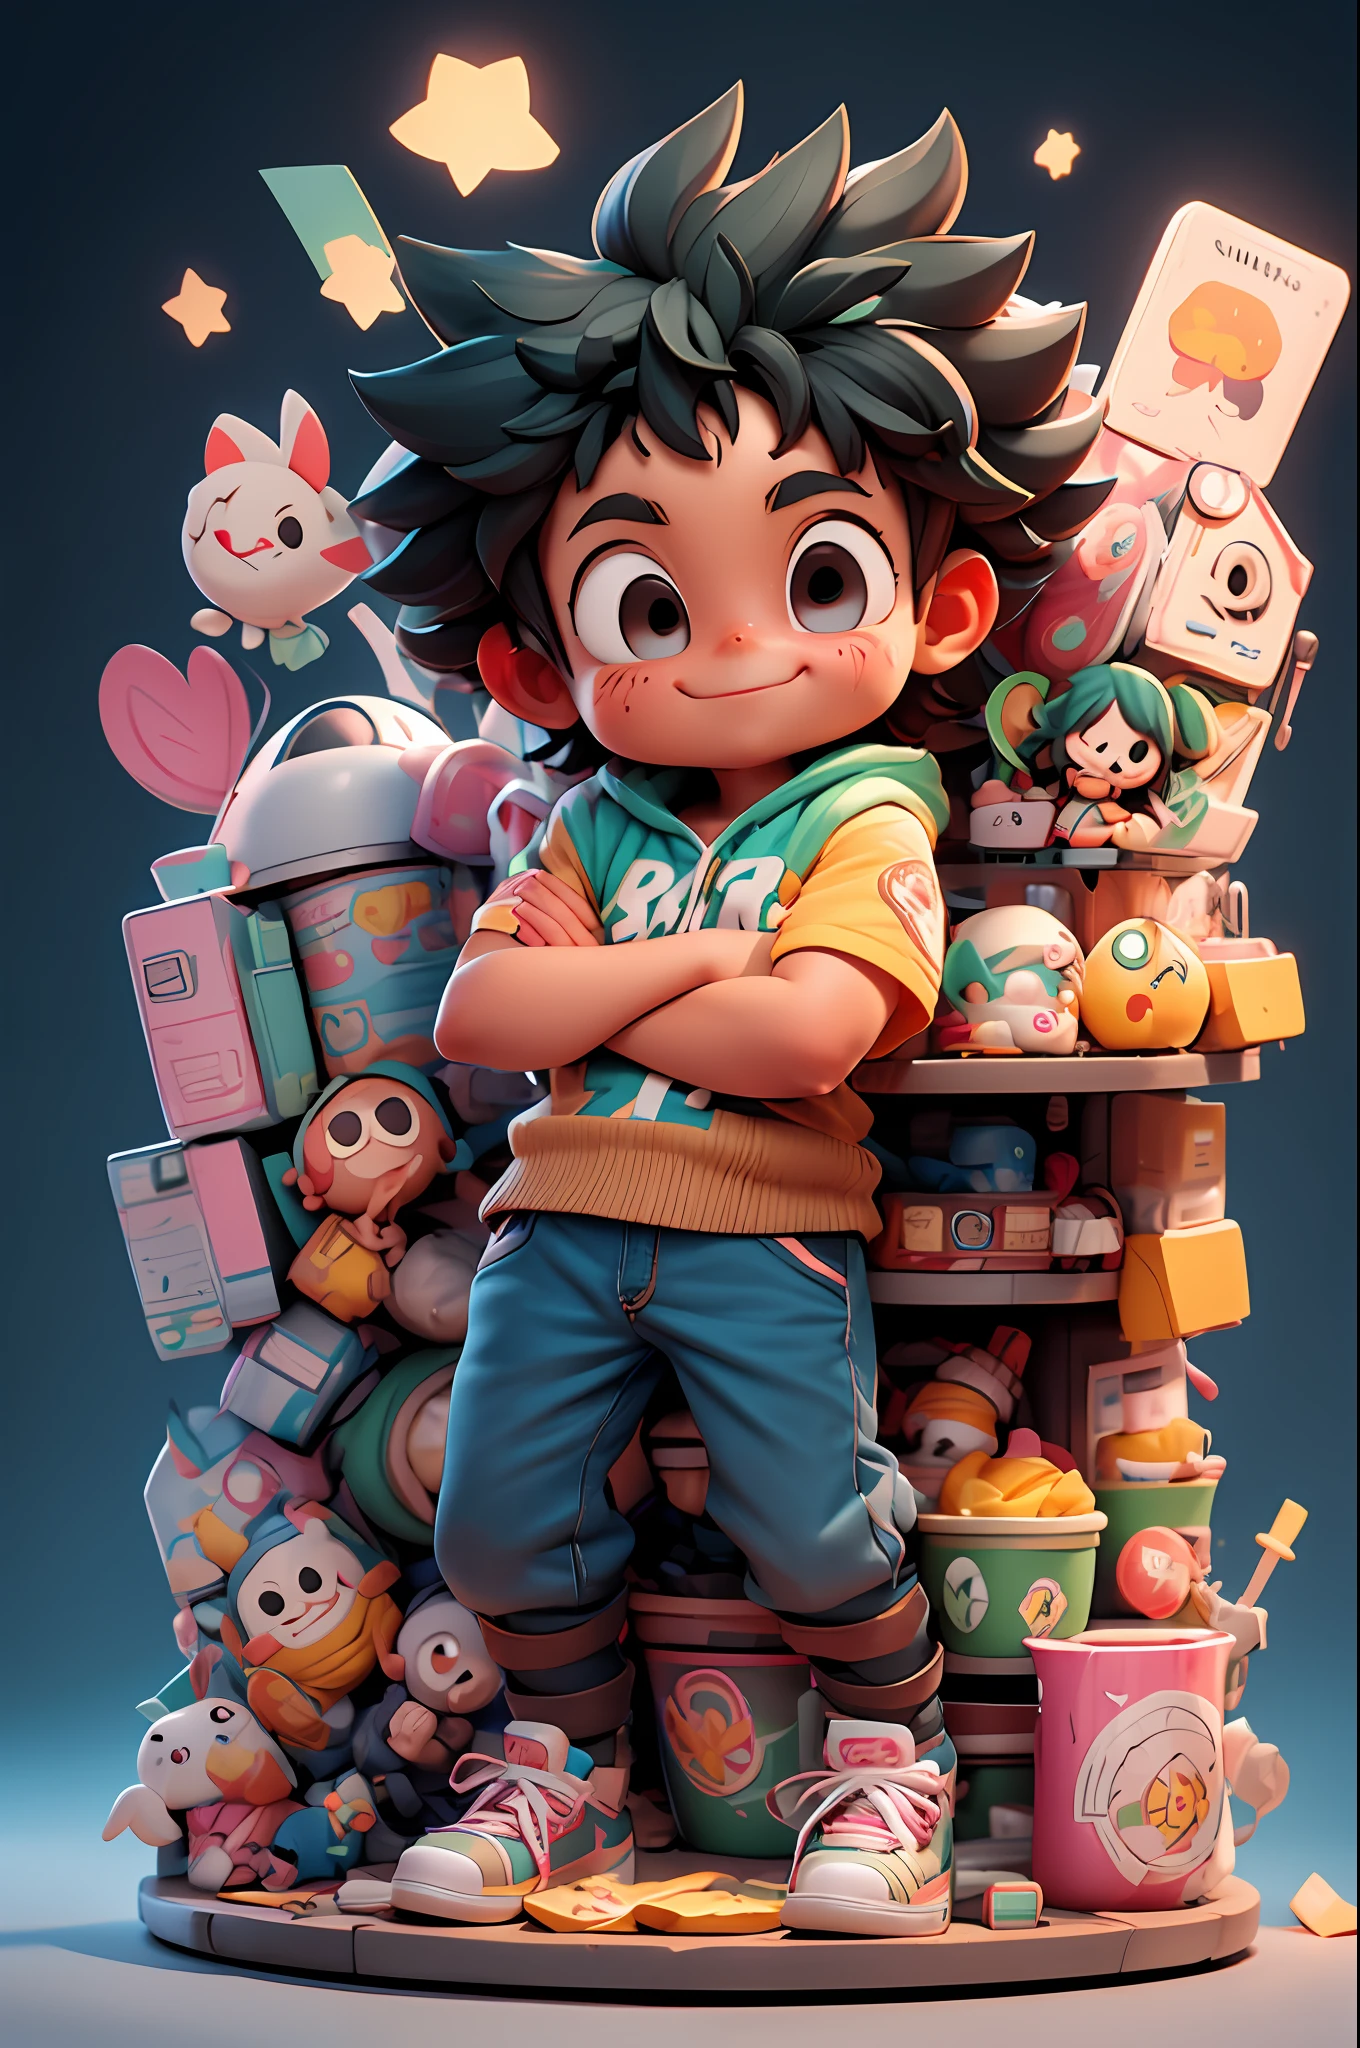 city street, Super cute Izuku Midoriya full body 3D image, 1pc, good eyes looking, big eyes, cute, happy, c4d, pop matt blind box, bright street light, toys, solid color background, chibi, fluorescent translucency, luminous body, kawaii, doll, Reference table, blind box pop mart, Pixar, complex details, 3D rendering, mixer, OC renderer, FOL body reference sheet, Dribble, High Details, 8K, Studio Lighting, , , toddler, Chibi, SD characters: 23, Magic Space Warehouse background, closed hands, fist, closed hands